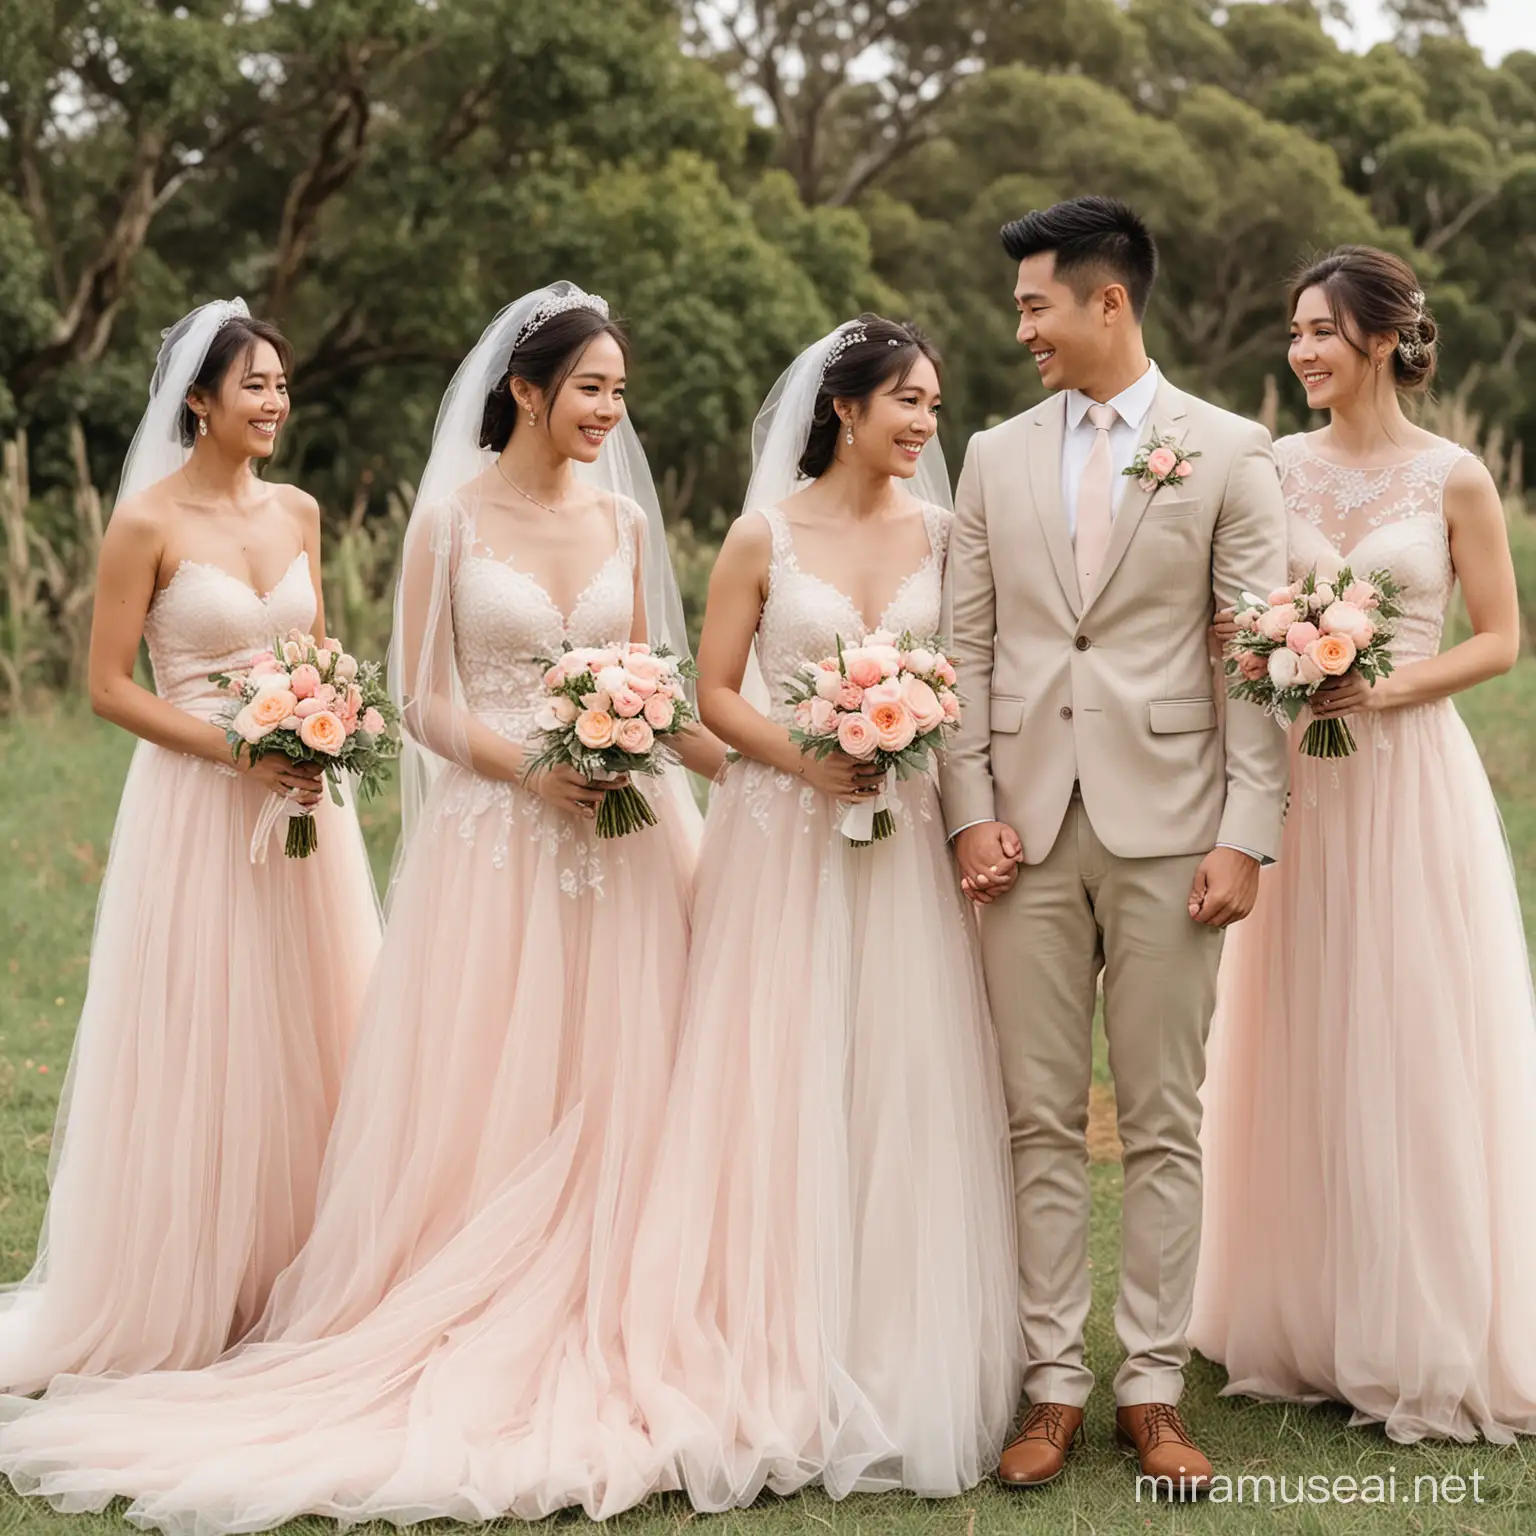 Asian Rustic Farmhouse Wedding with Pastel Watermelon Pink Theme